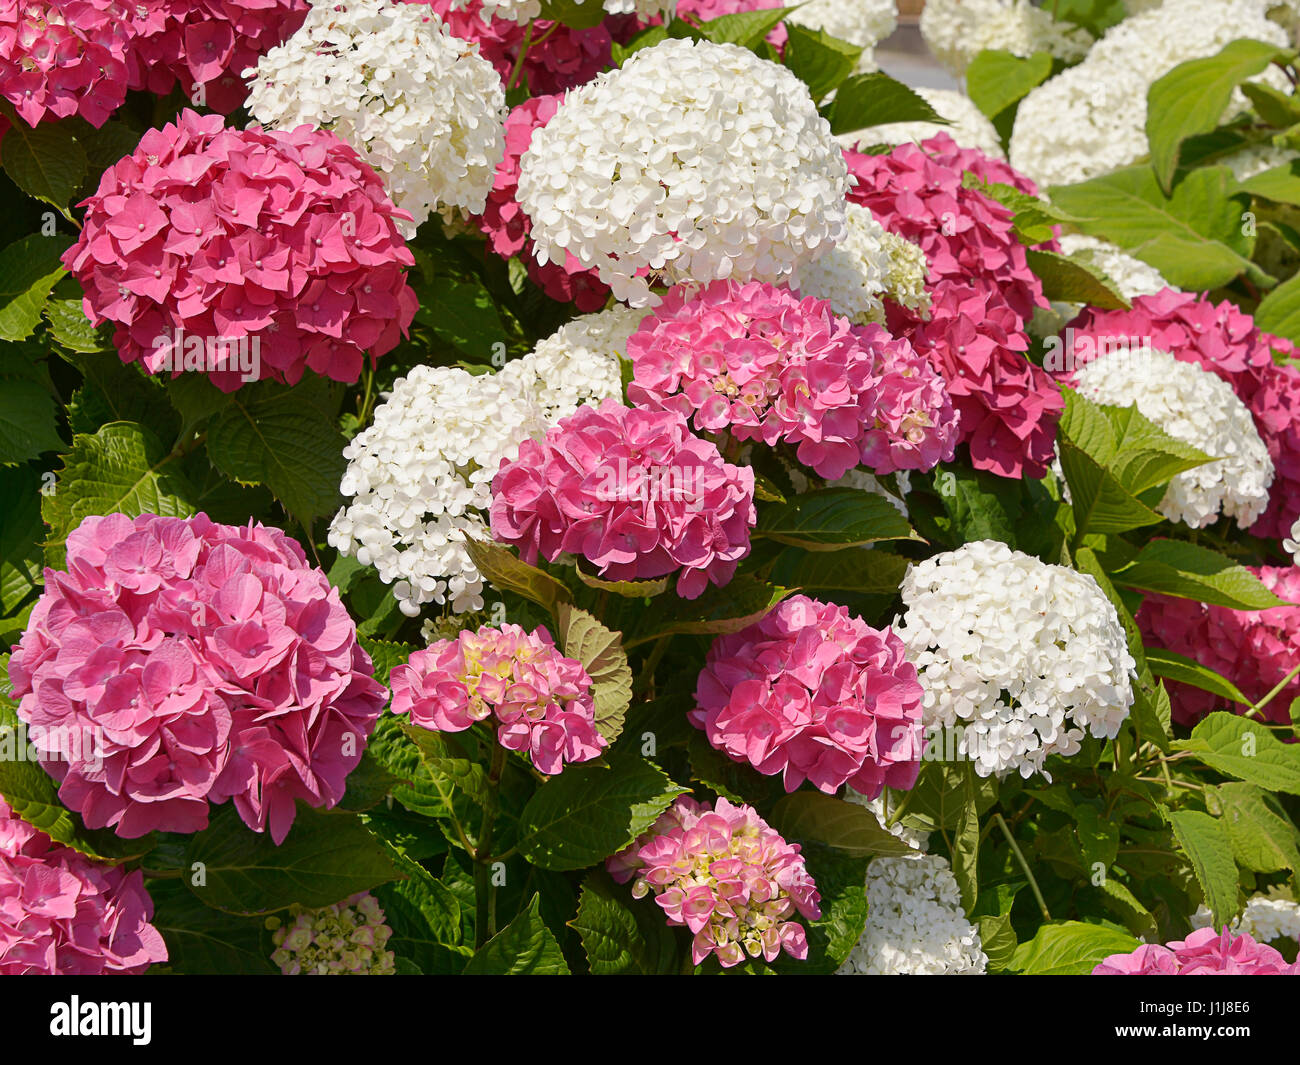 Closeup of red and white Hydrangea macrophylla flowers (or hortensia) Stock Photo